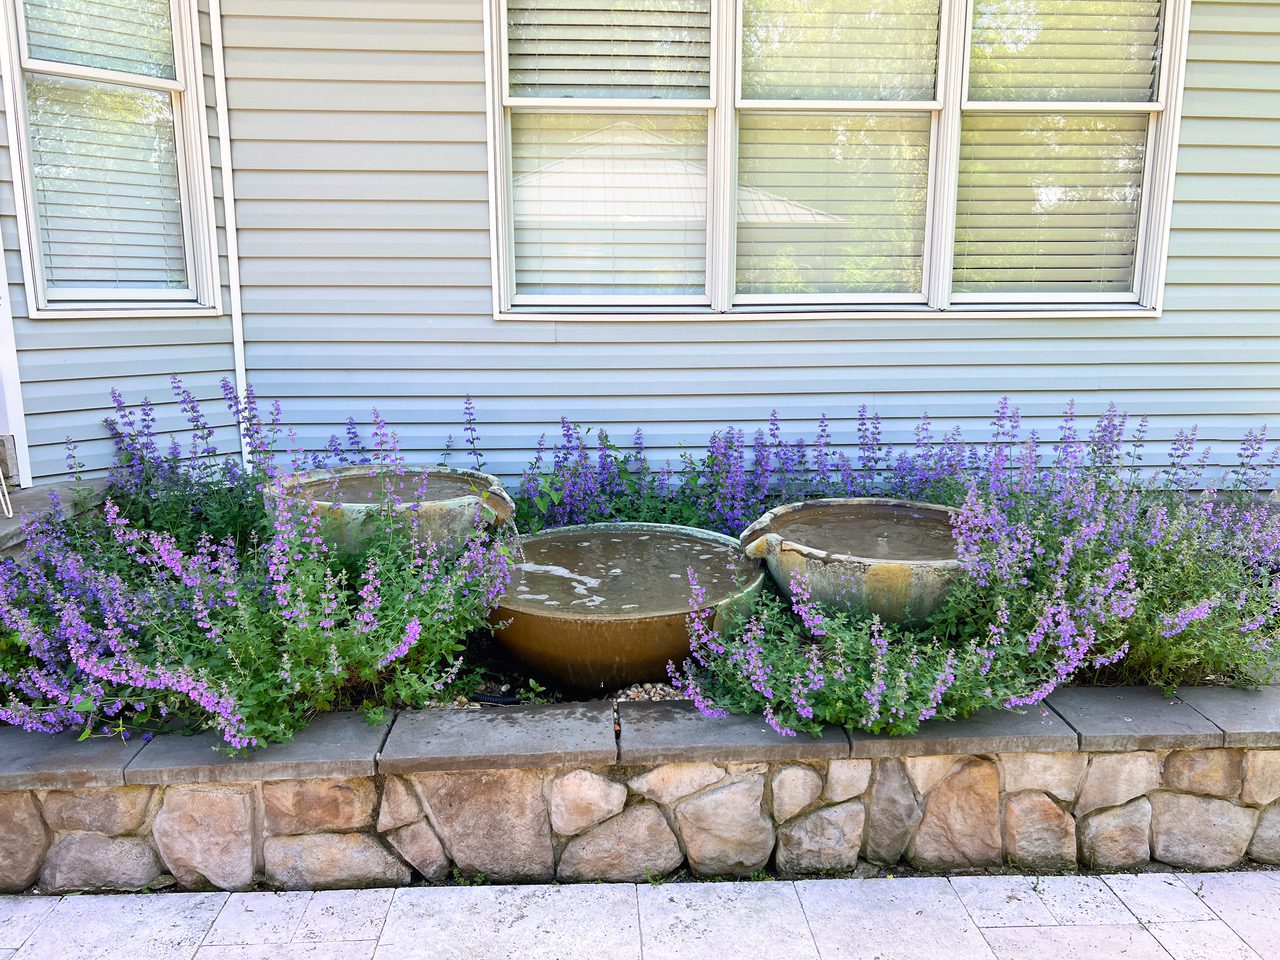 A stone wall with three pots and some purple flowers.